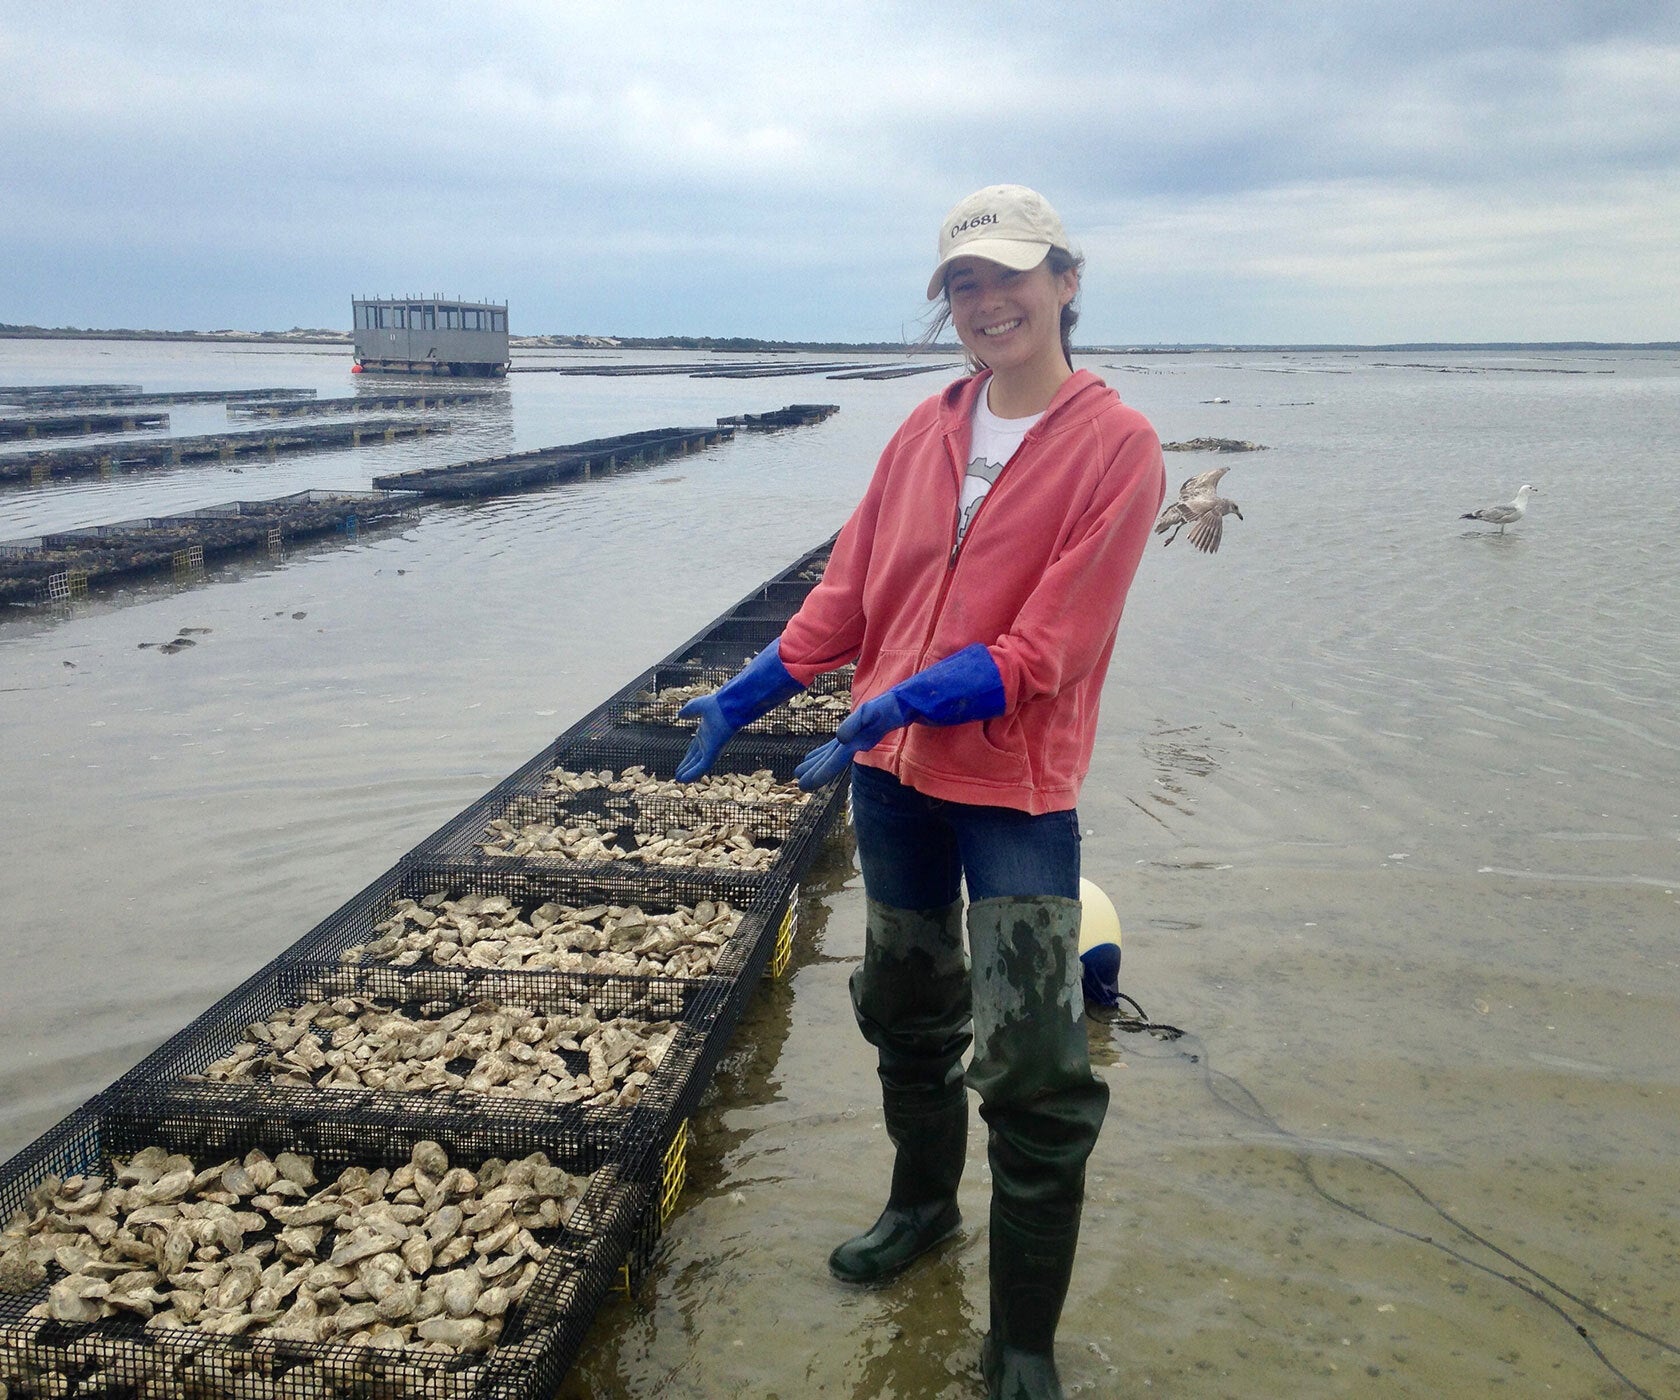 Spring Creek Oysters from Barnstable, MA